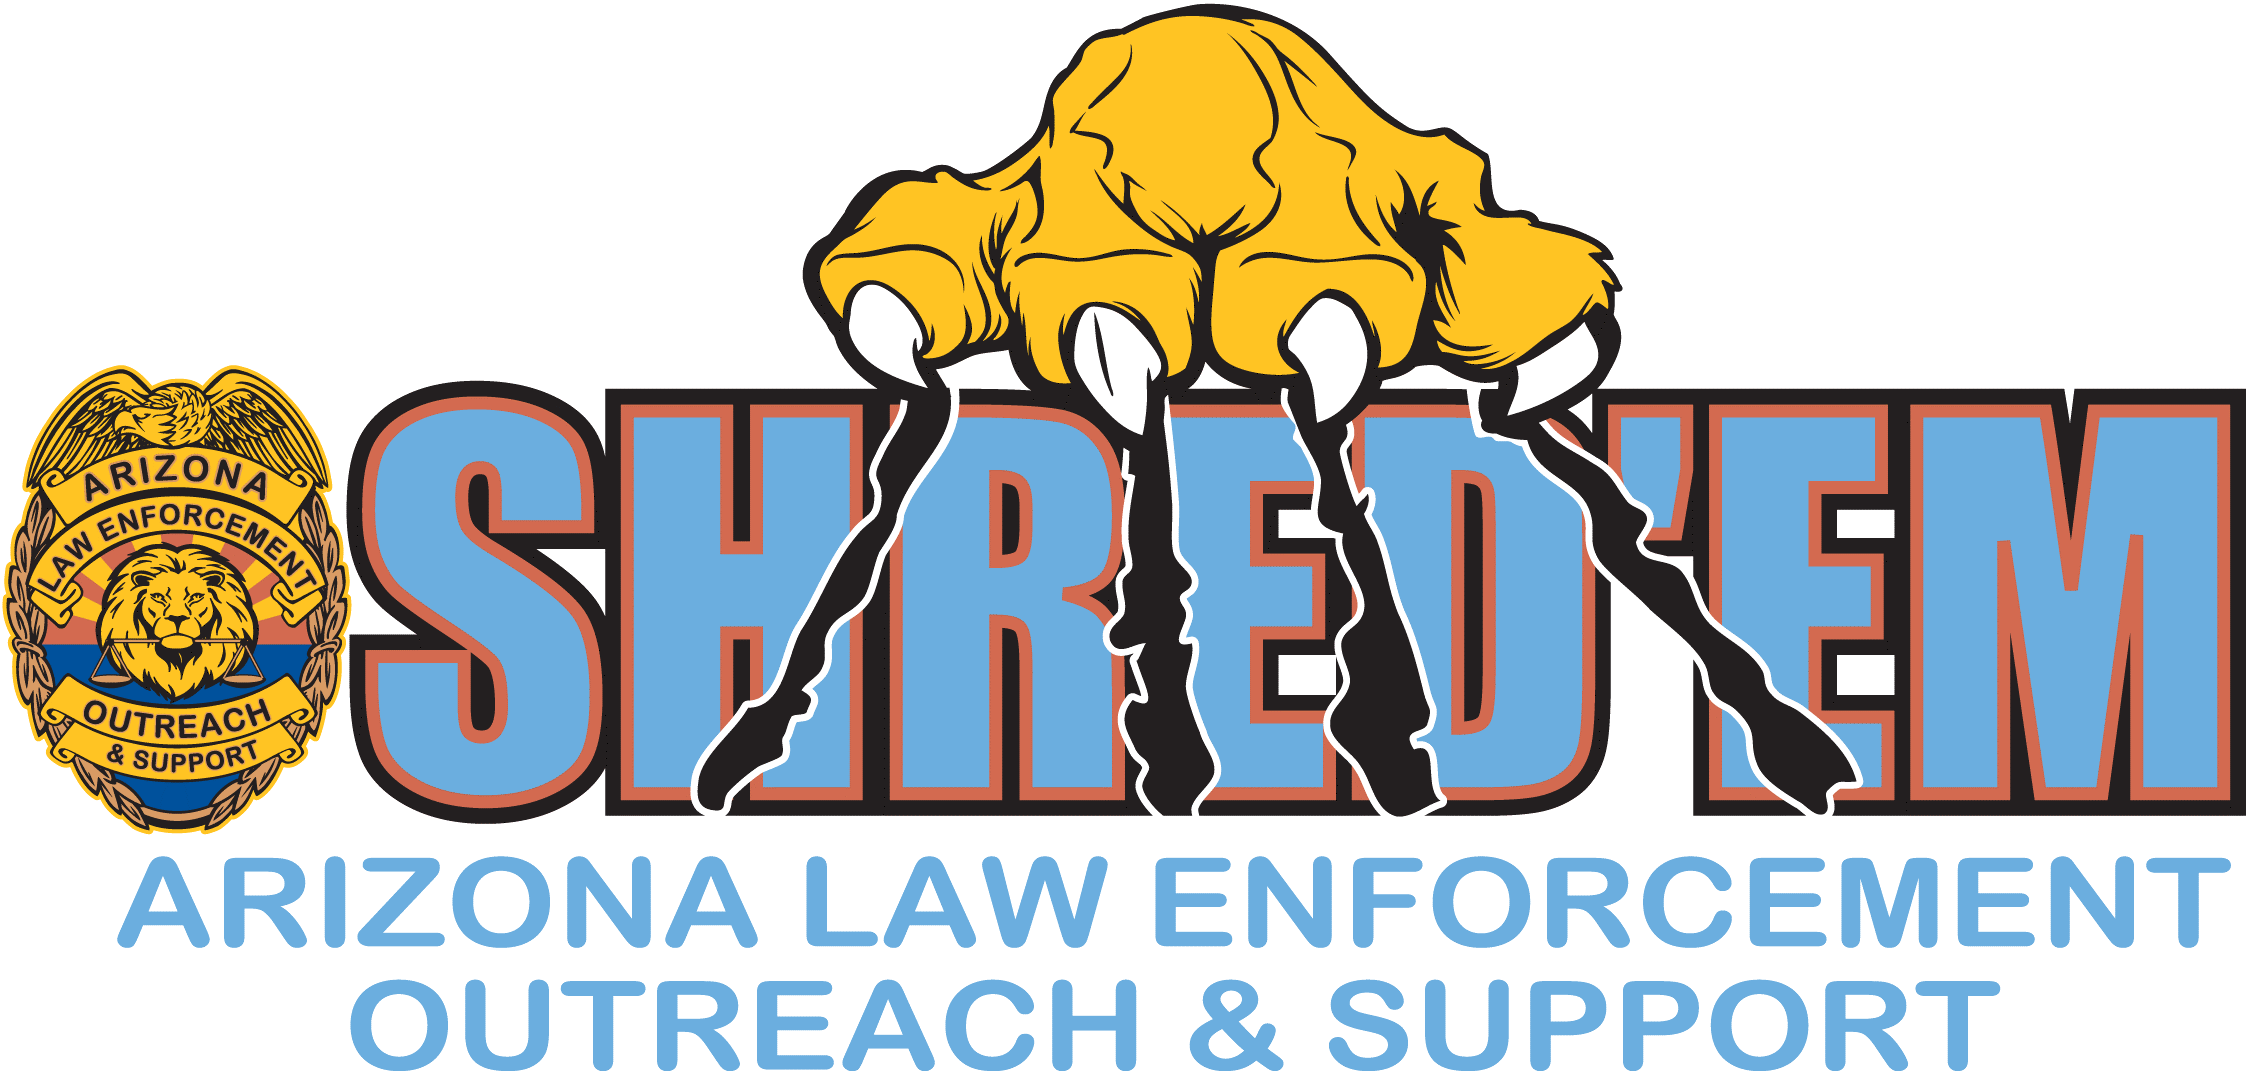 SHRED’em DATE SAVER March 20th at Right Toyota